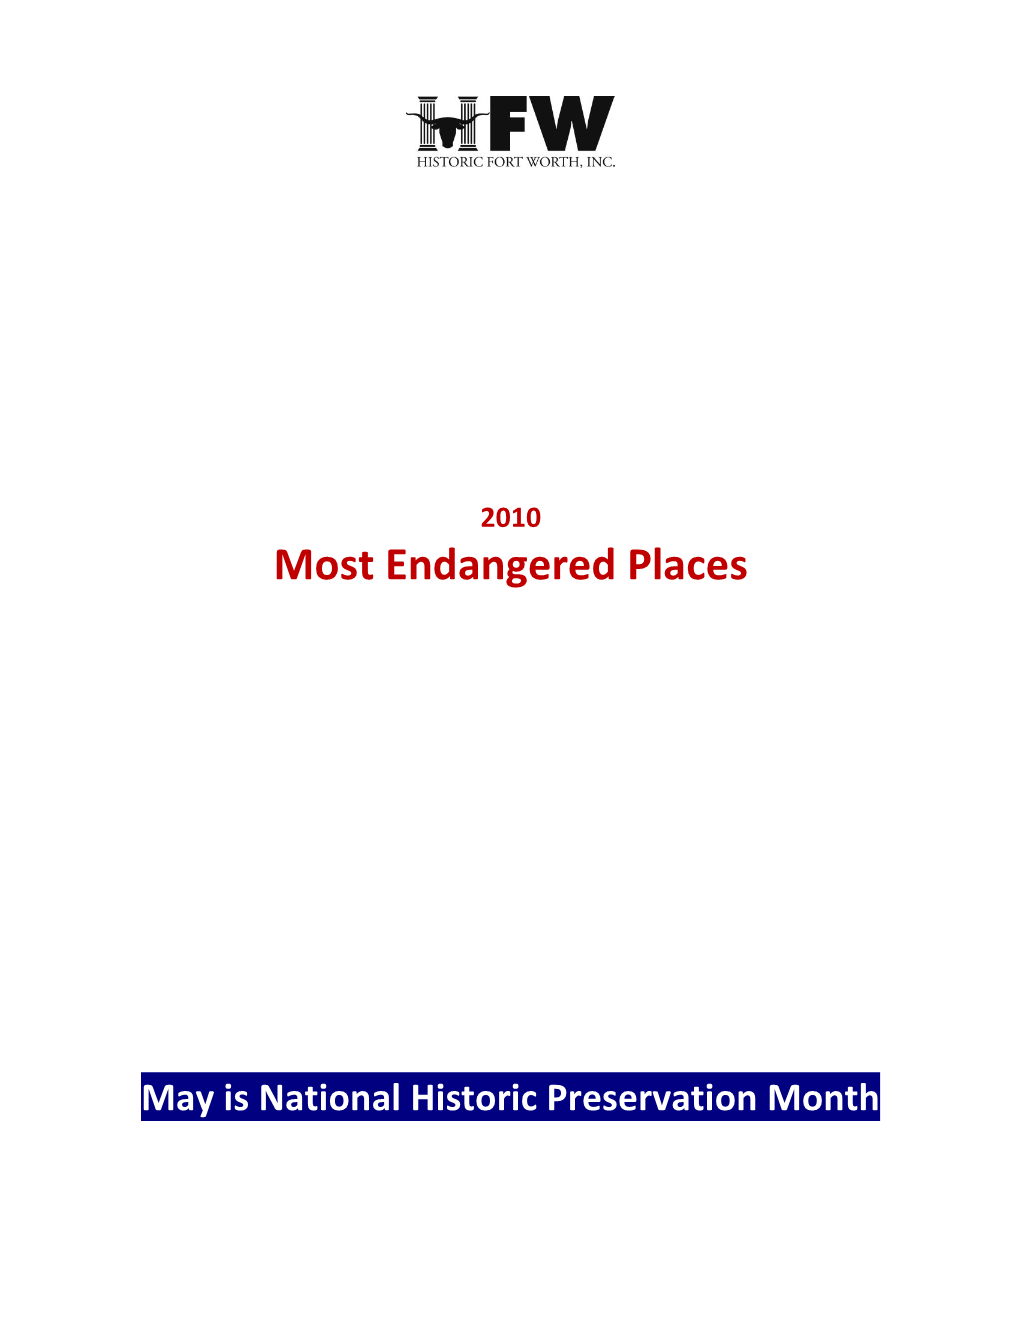 Most Endangered Places